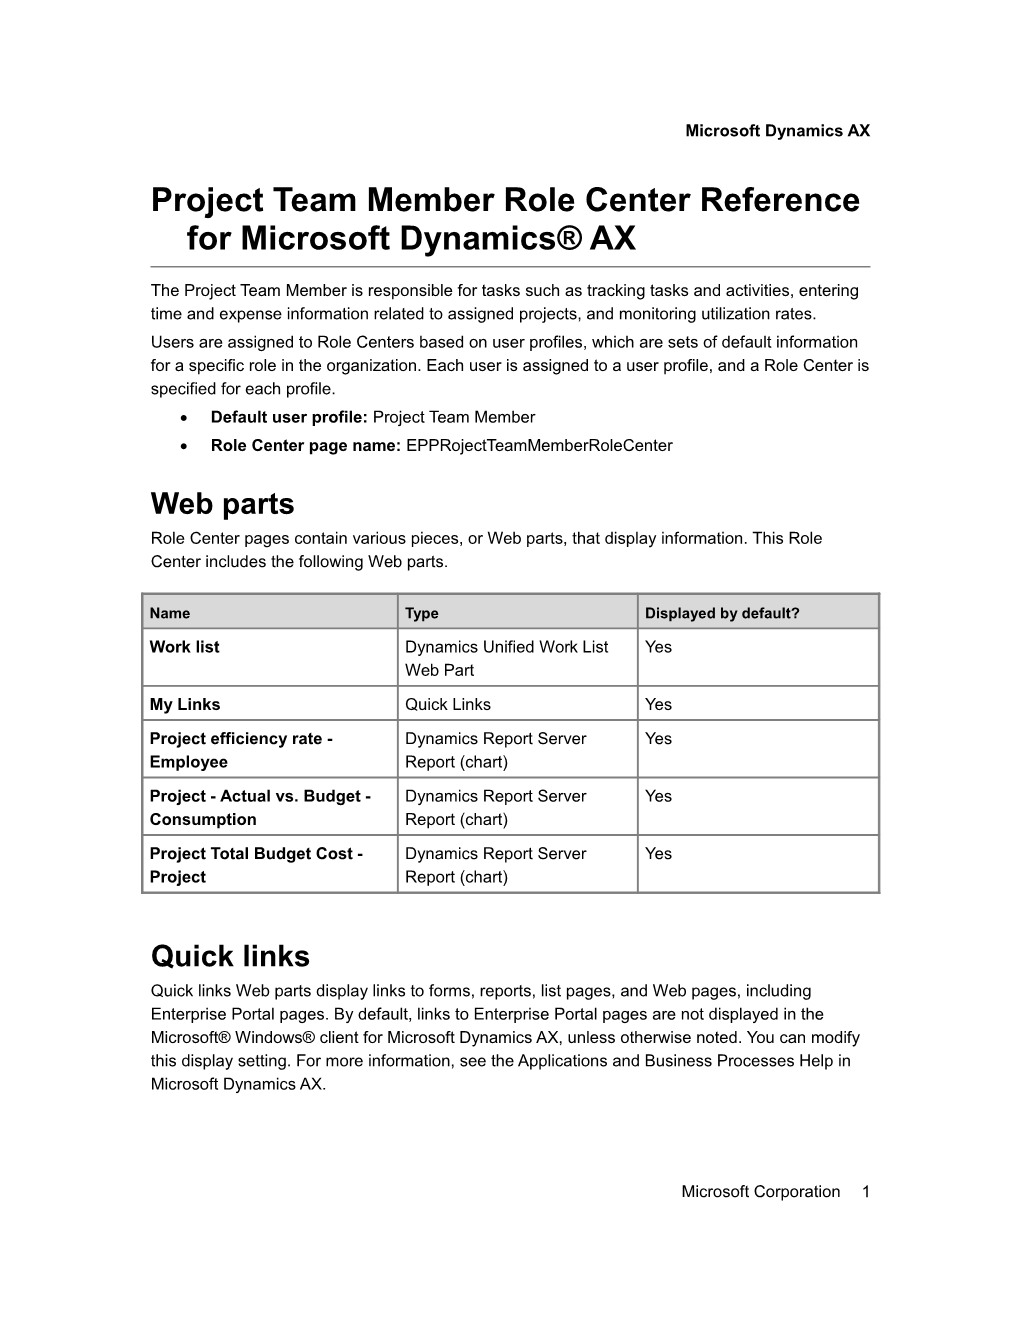 Project Team Member Role Center Reference For Microsoft Dynamics? AX